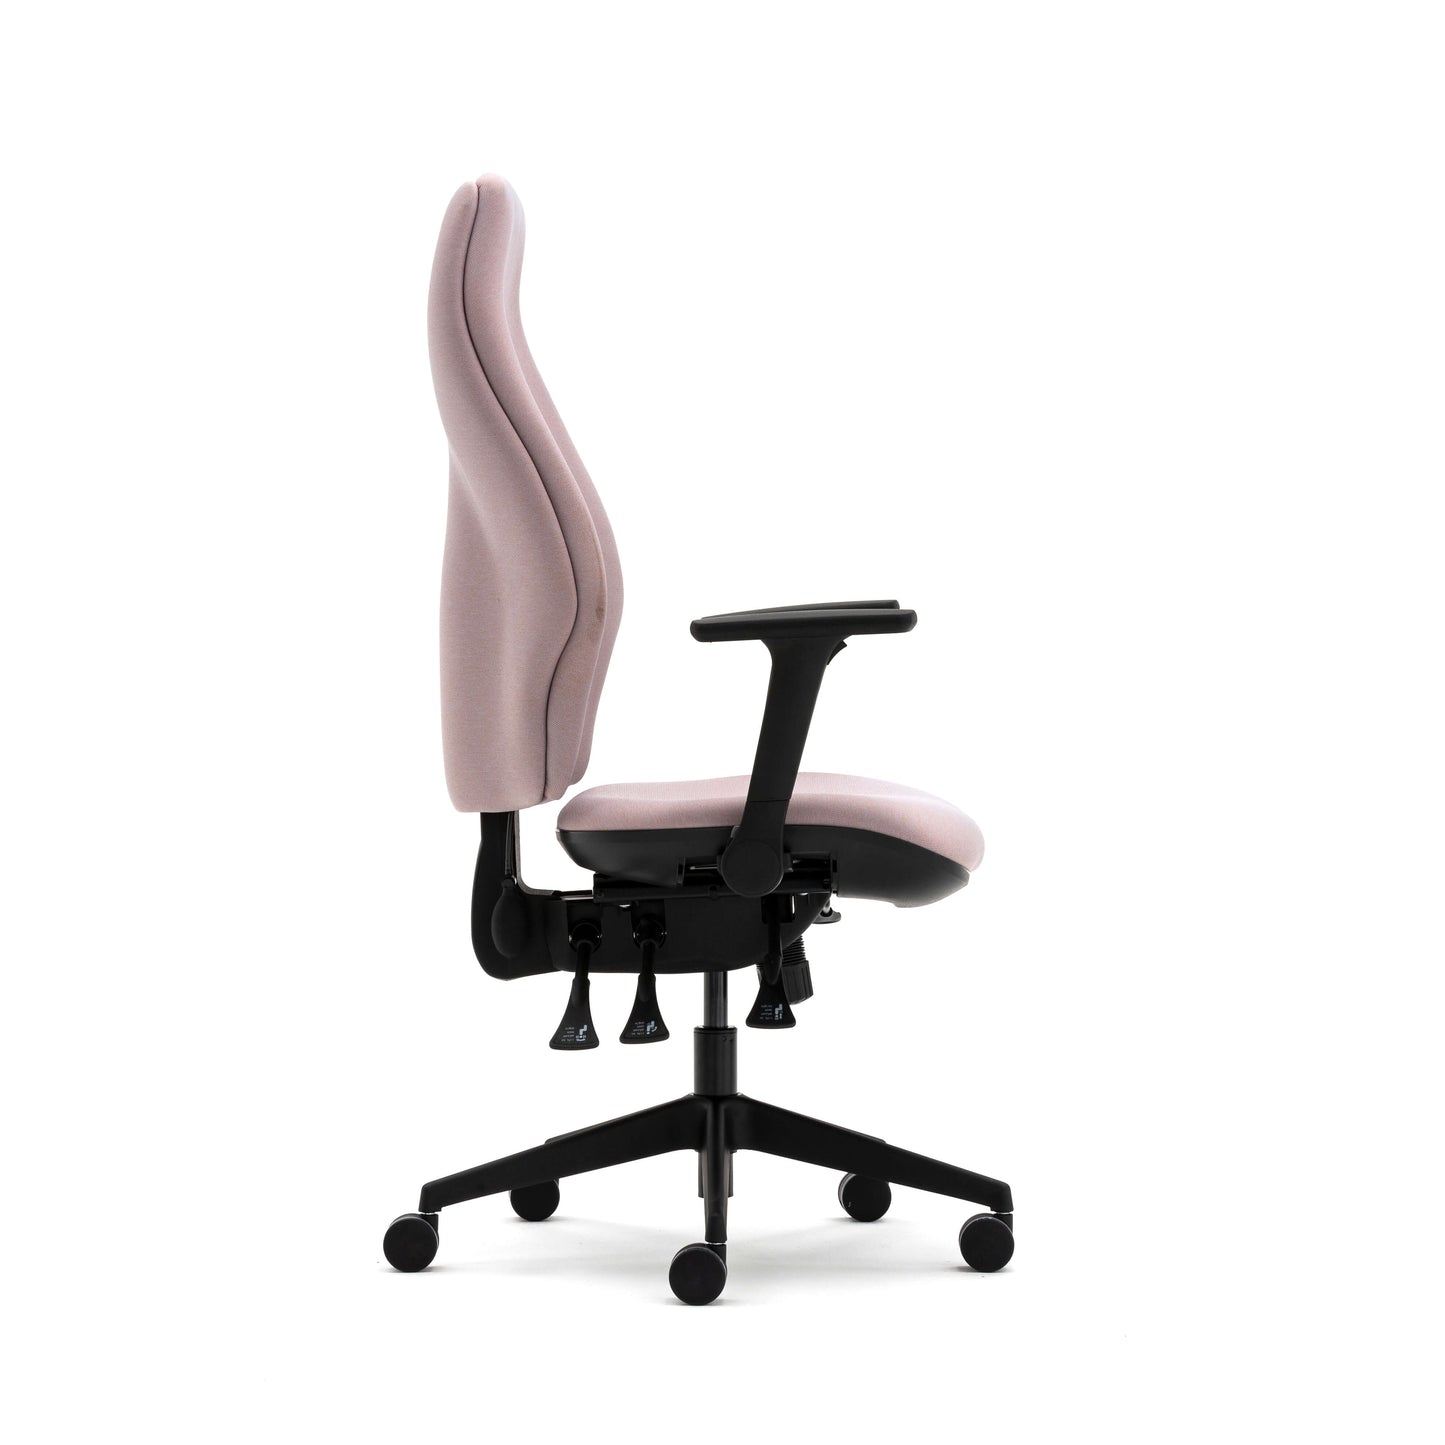 OC307FDA - ORTHOPAEDICA 300 SERIES - Fold Down Height Adjustable Arms - Independent Mechanism